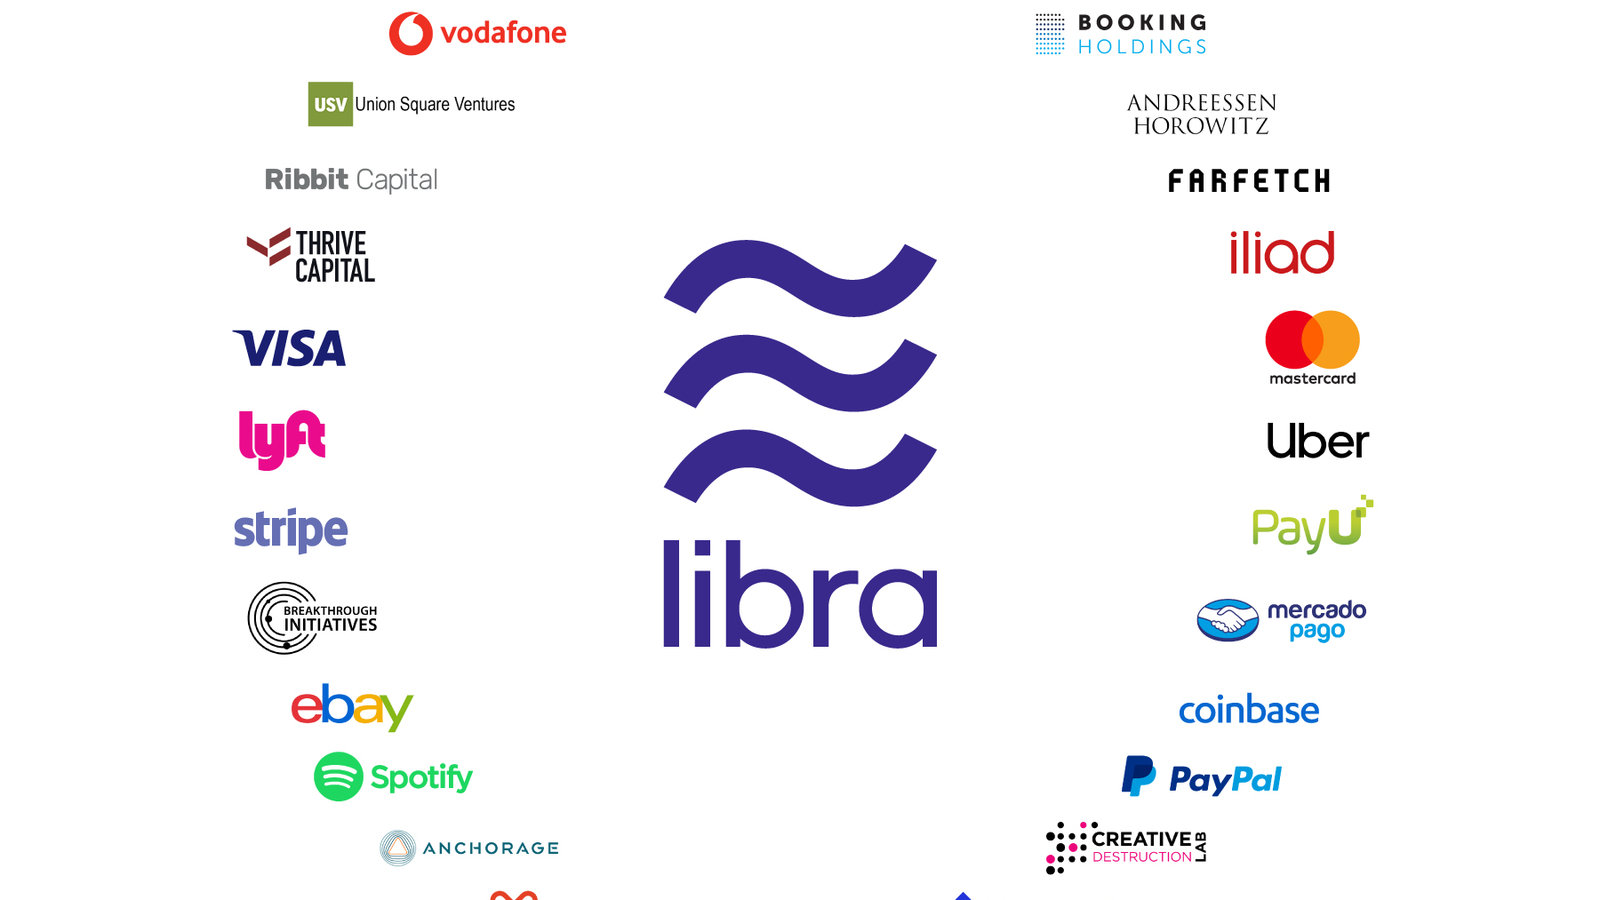 Facebook announces Libra cryptocurrency: All you need to know | TechCrunch